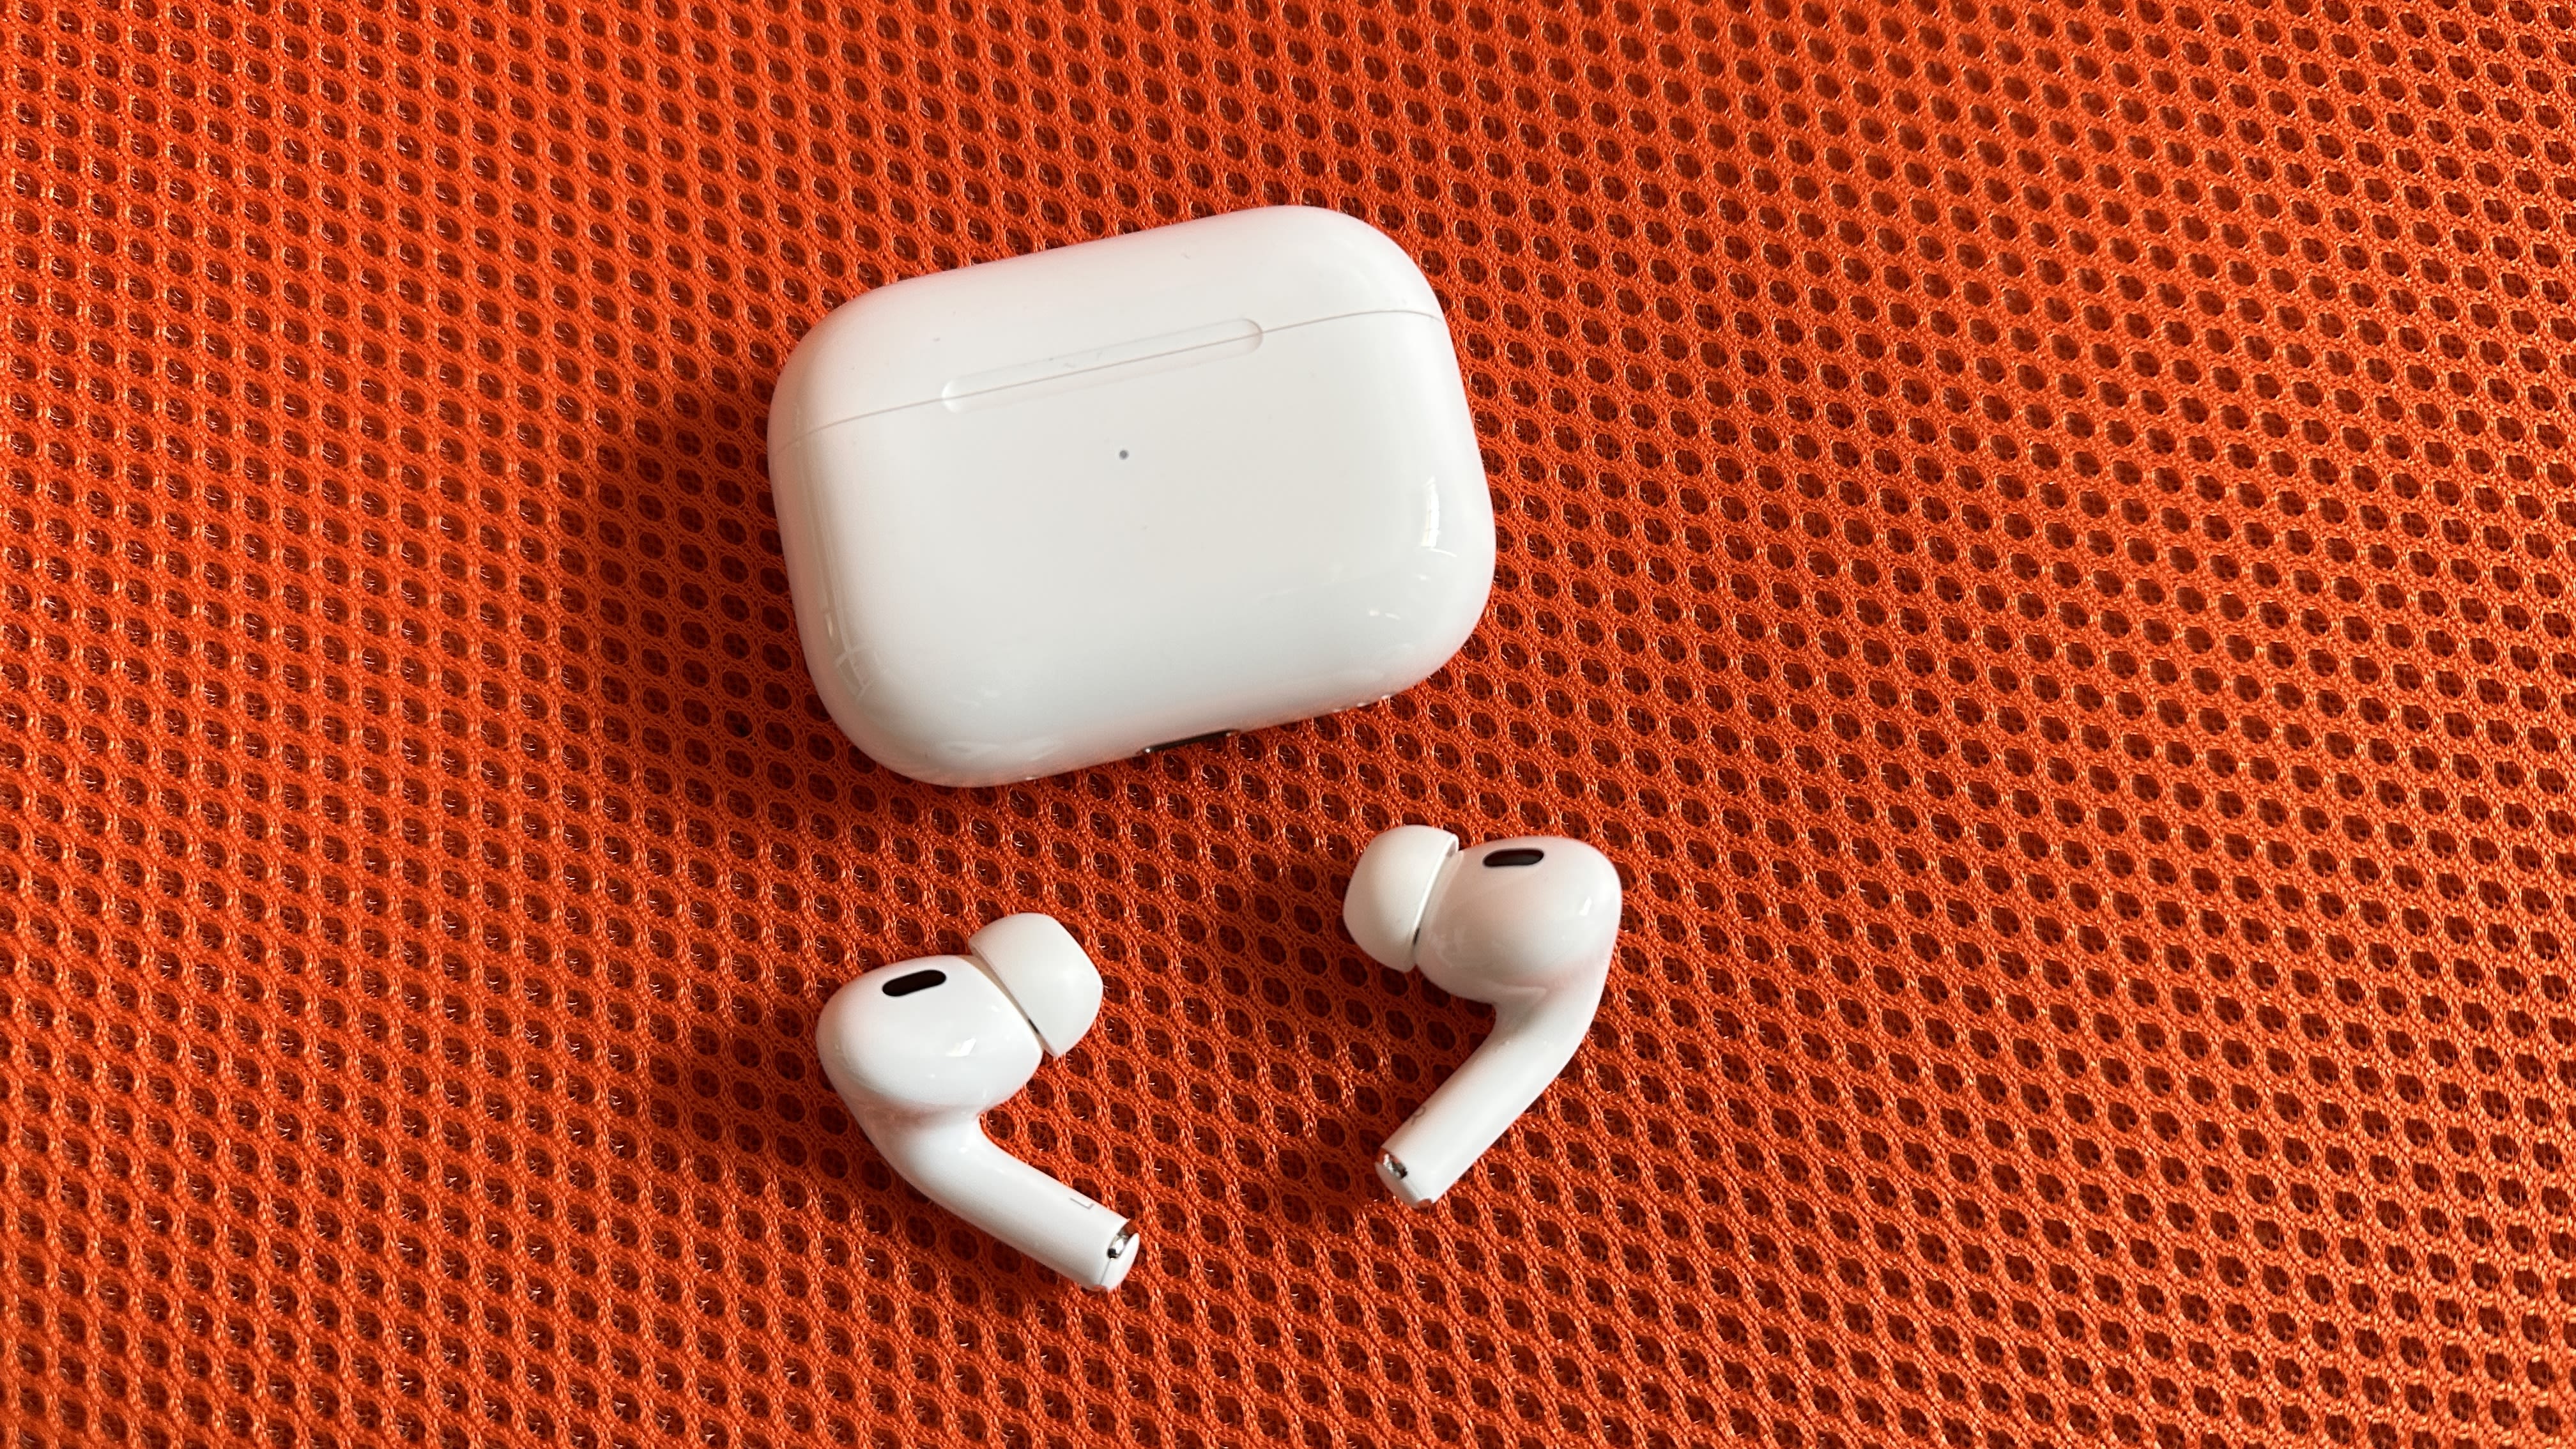 Apple EarPods with USB-C Connector - Mobiles & E-Cards